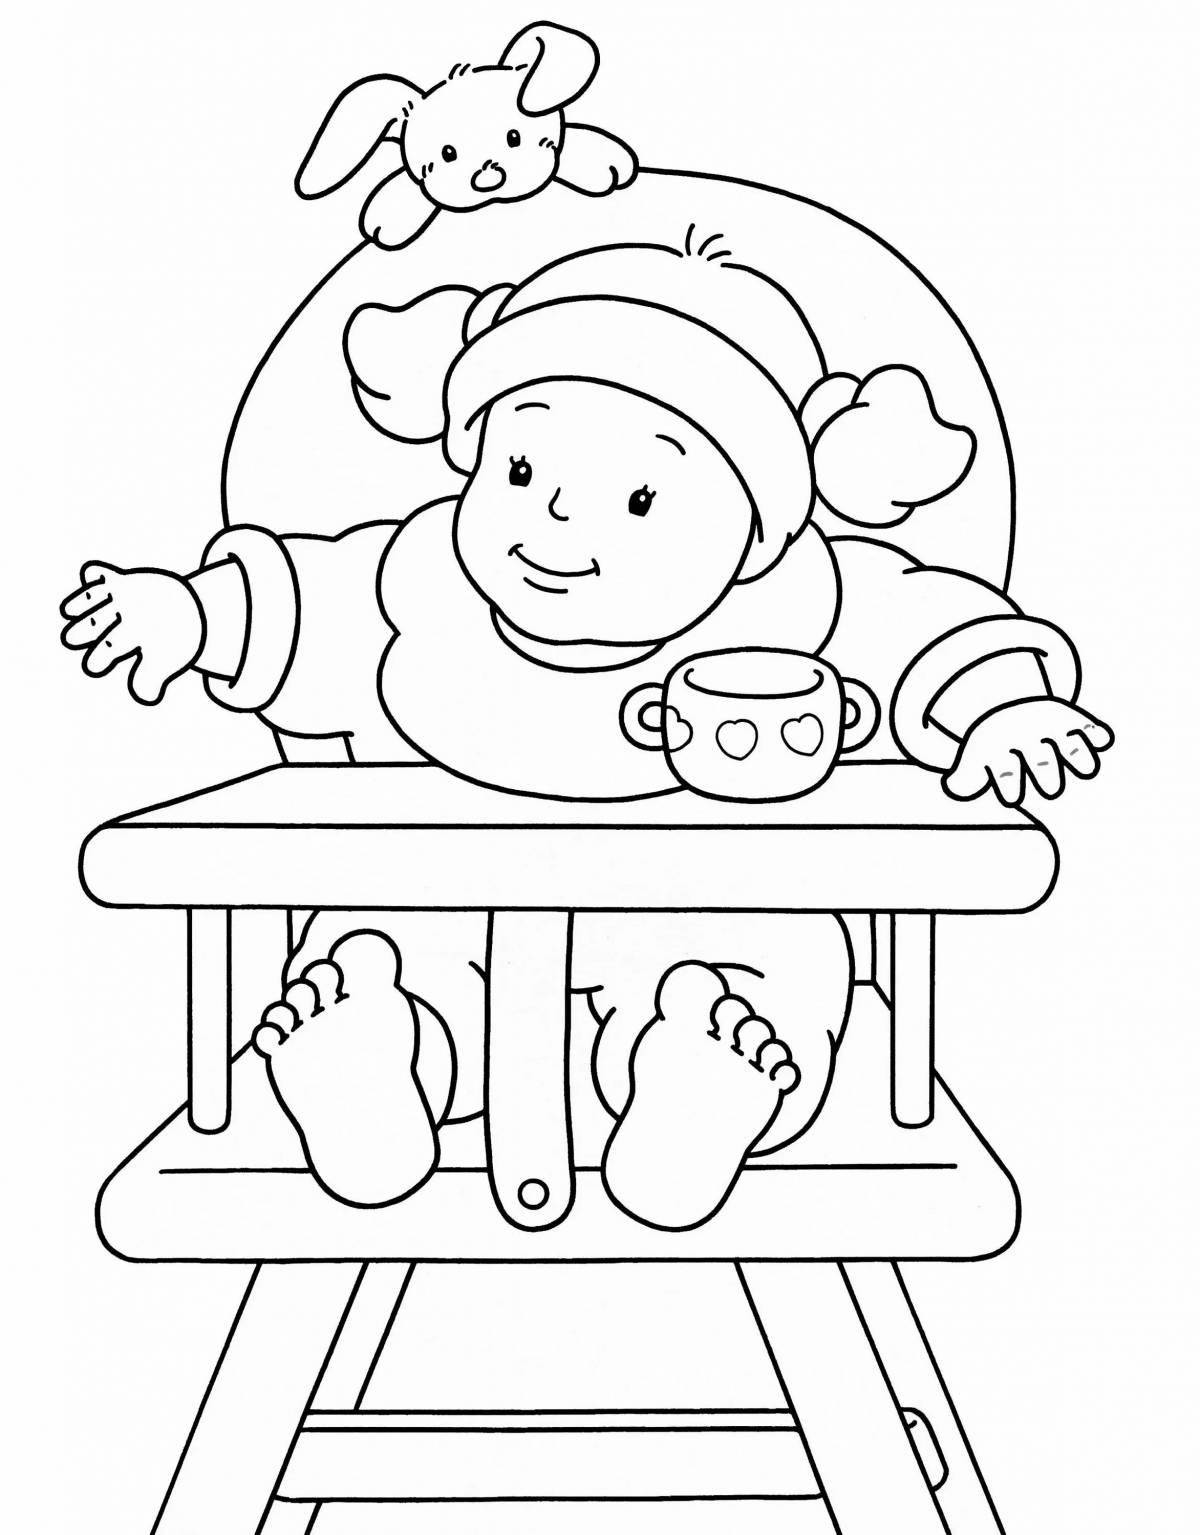 Serene coloring book for kids